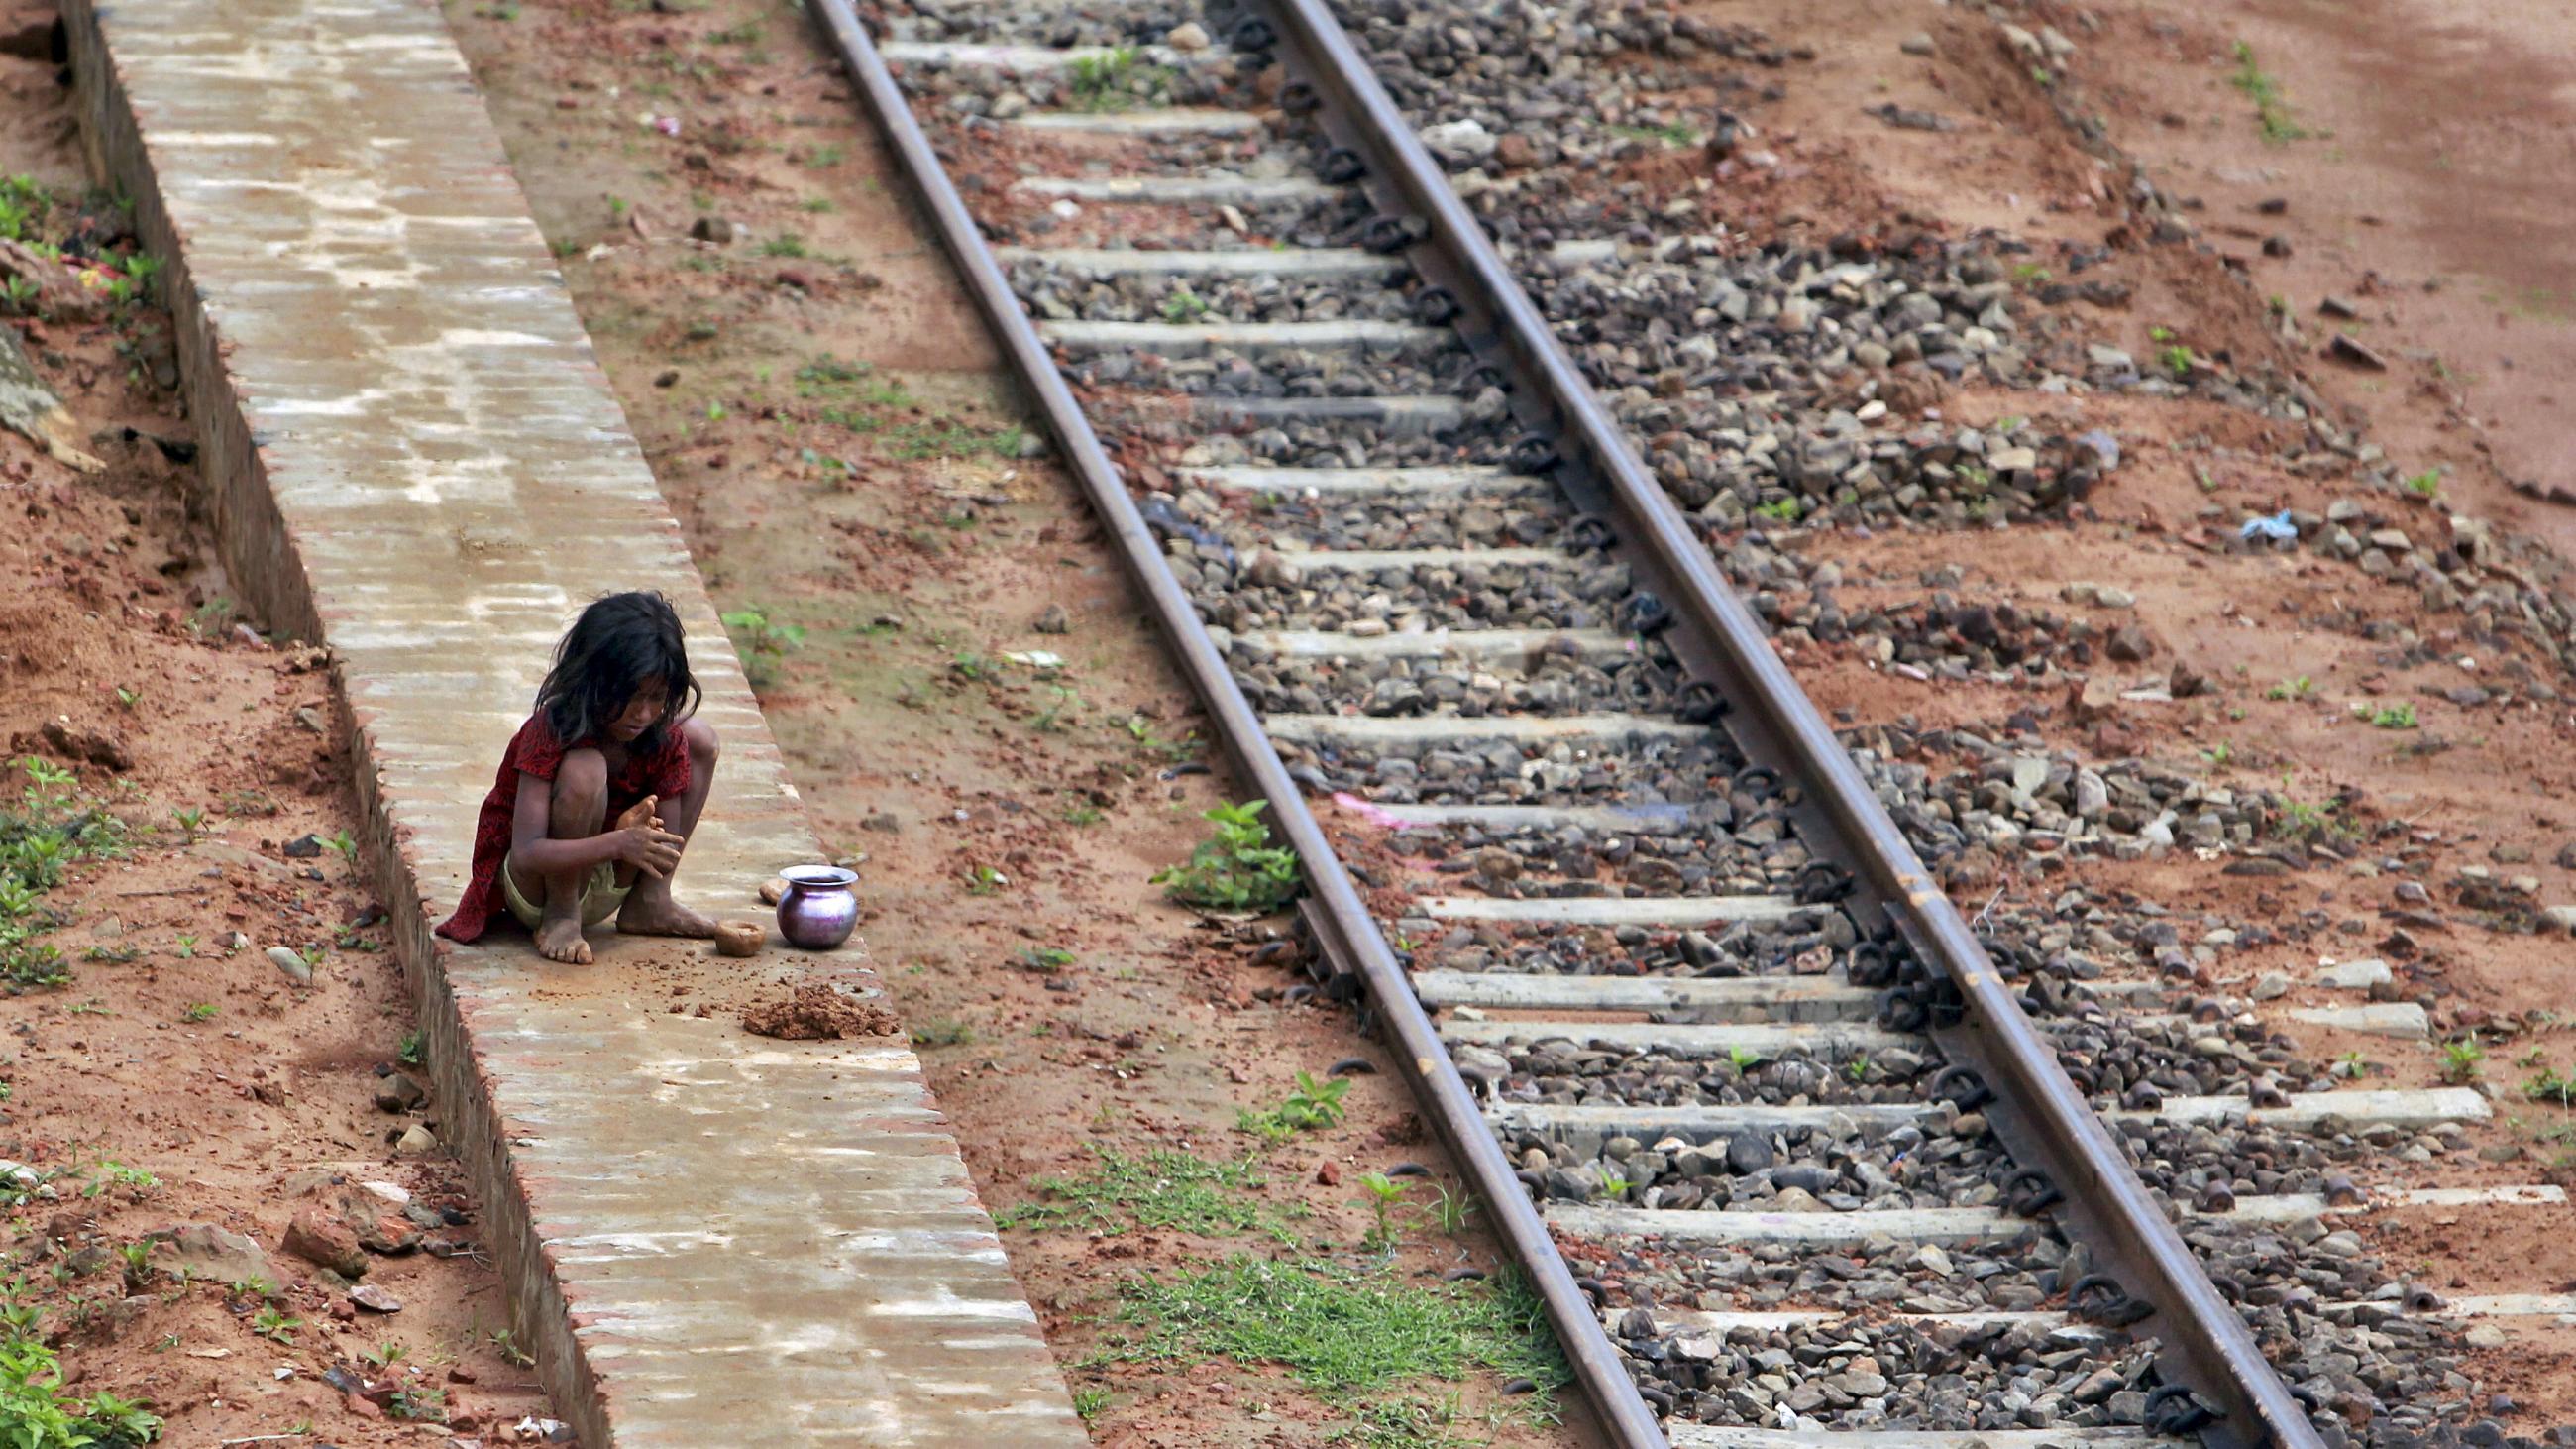 A girl plays with clay next to a railway track in Agartala, India on May 28, 2015.